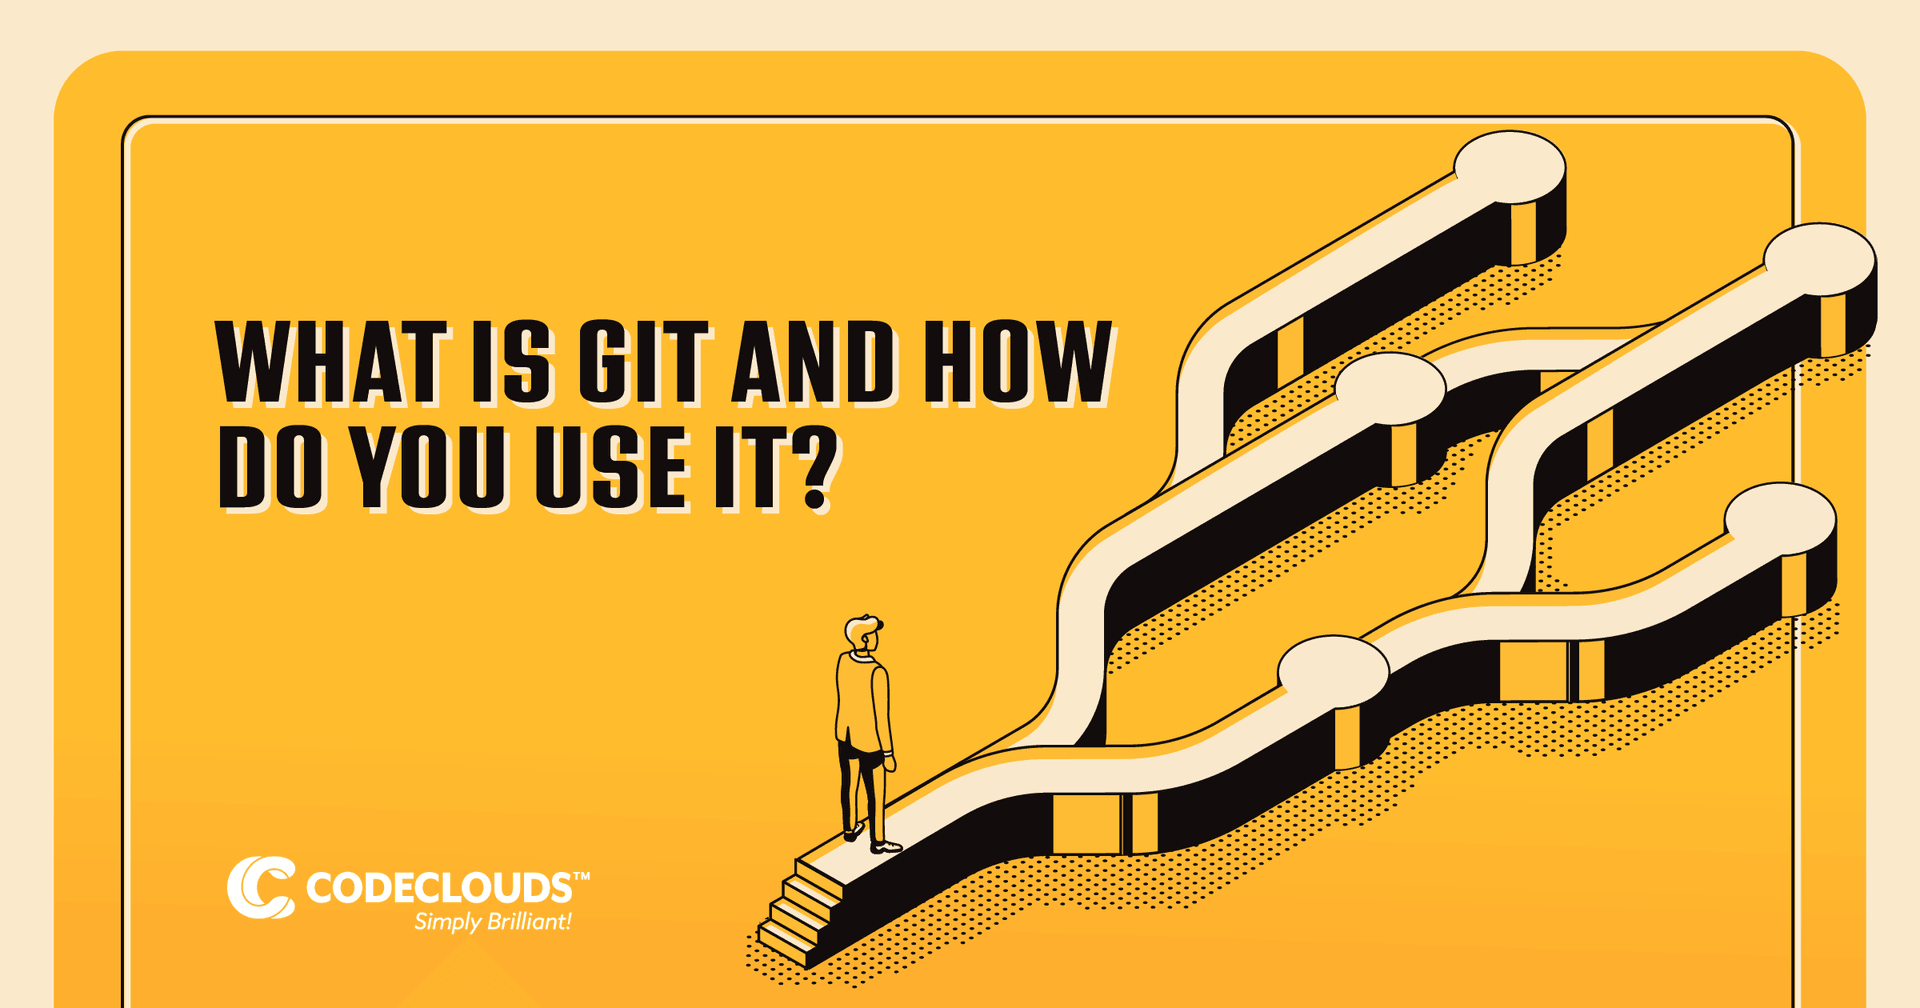 What is Git and how do you use it?